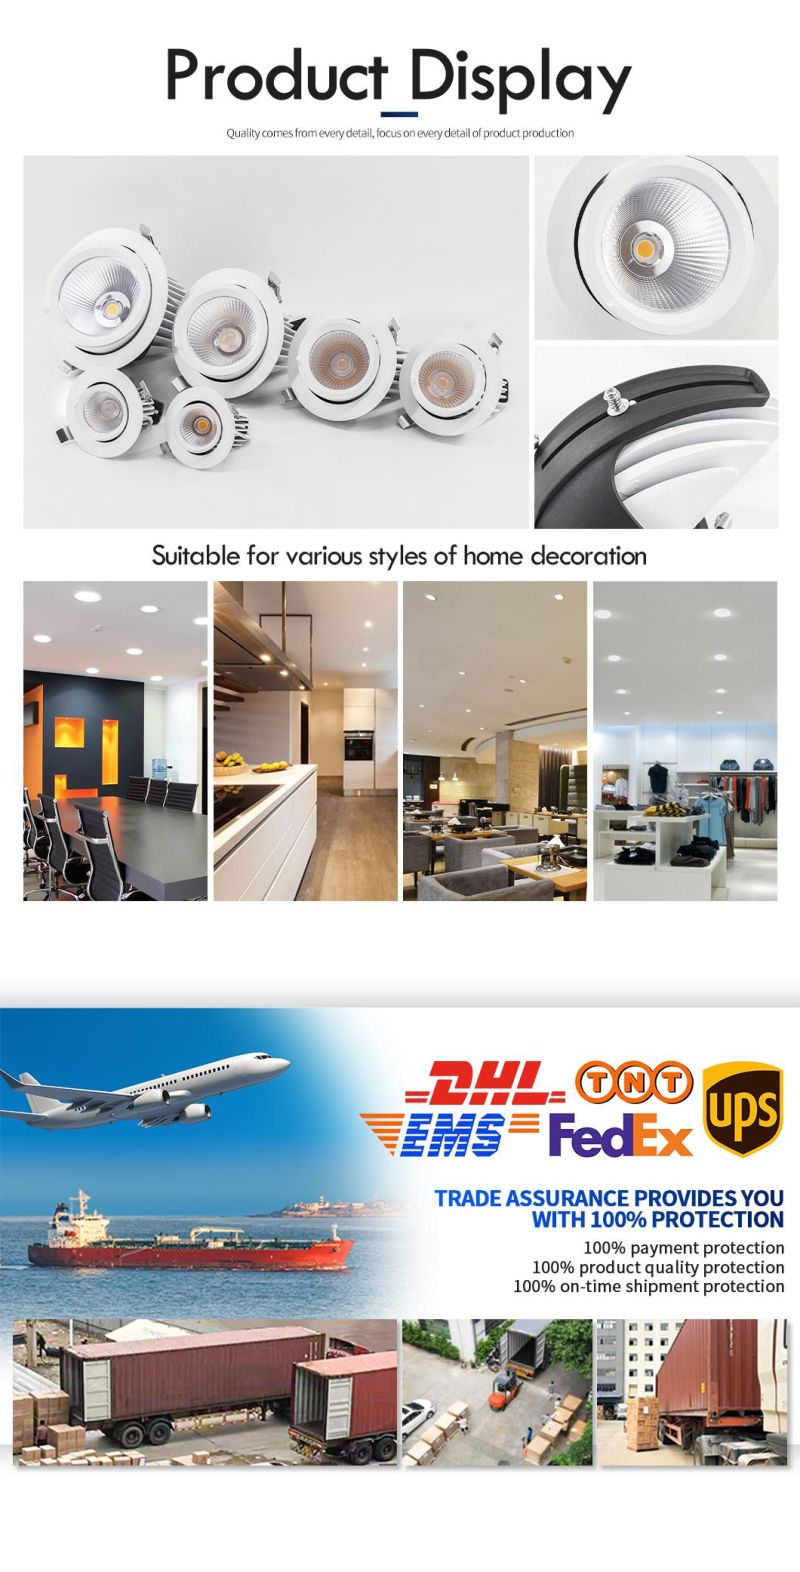 Adjustable LED Ceiling Light Recessed Downlight Indoor Gimbal Exterior Down Light